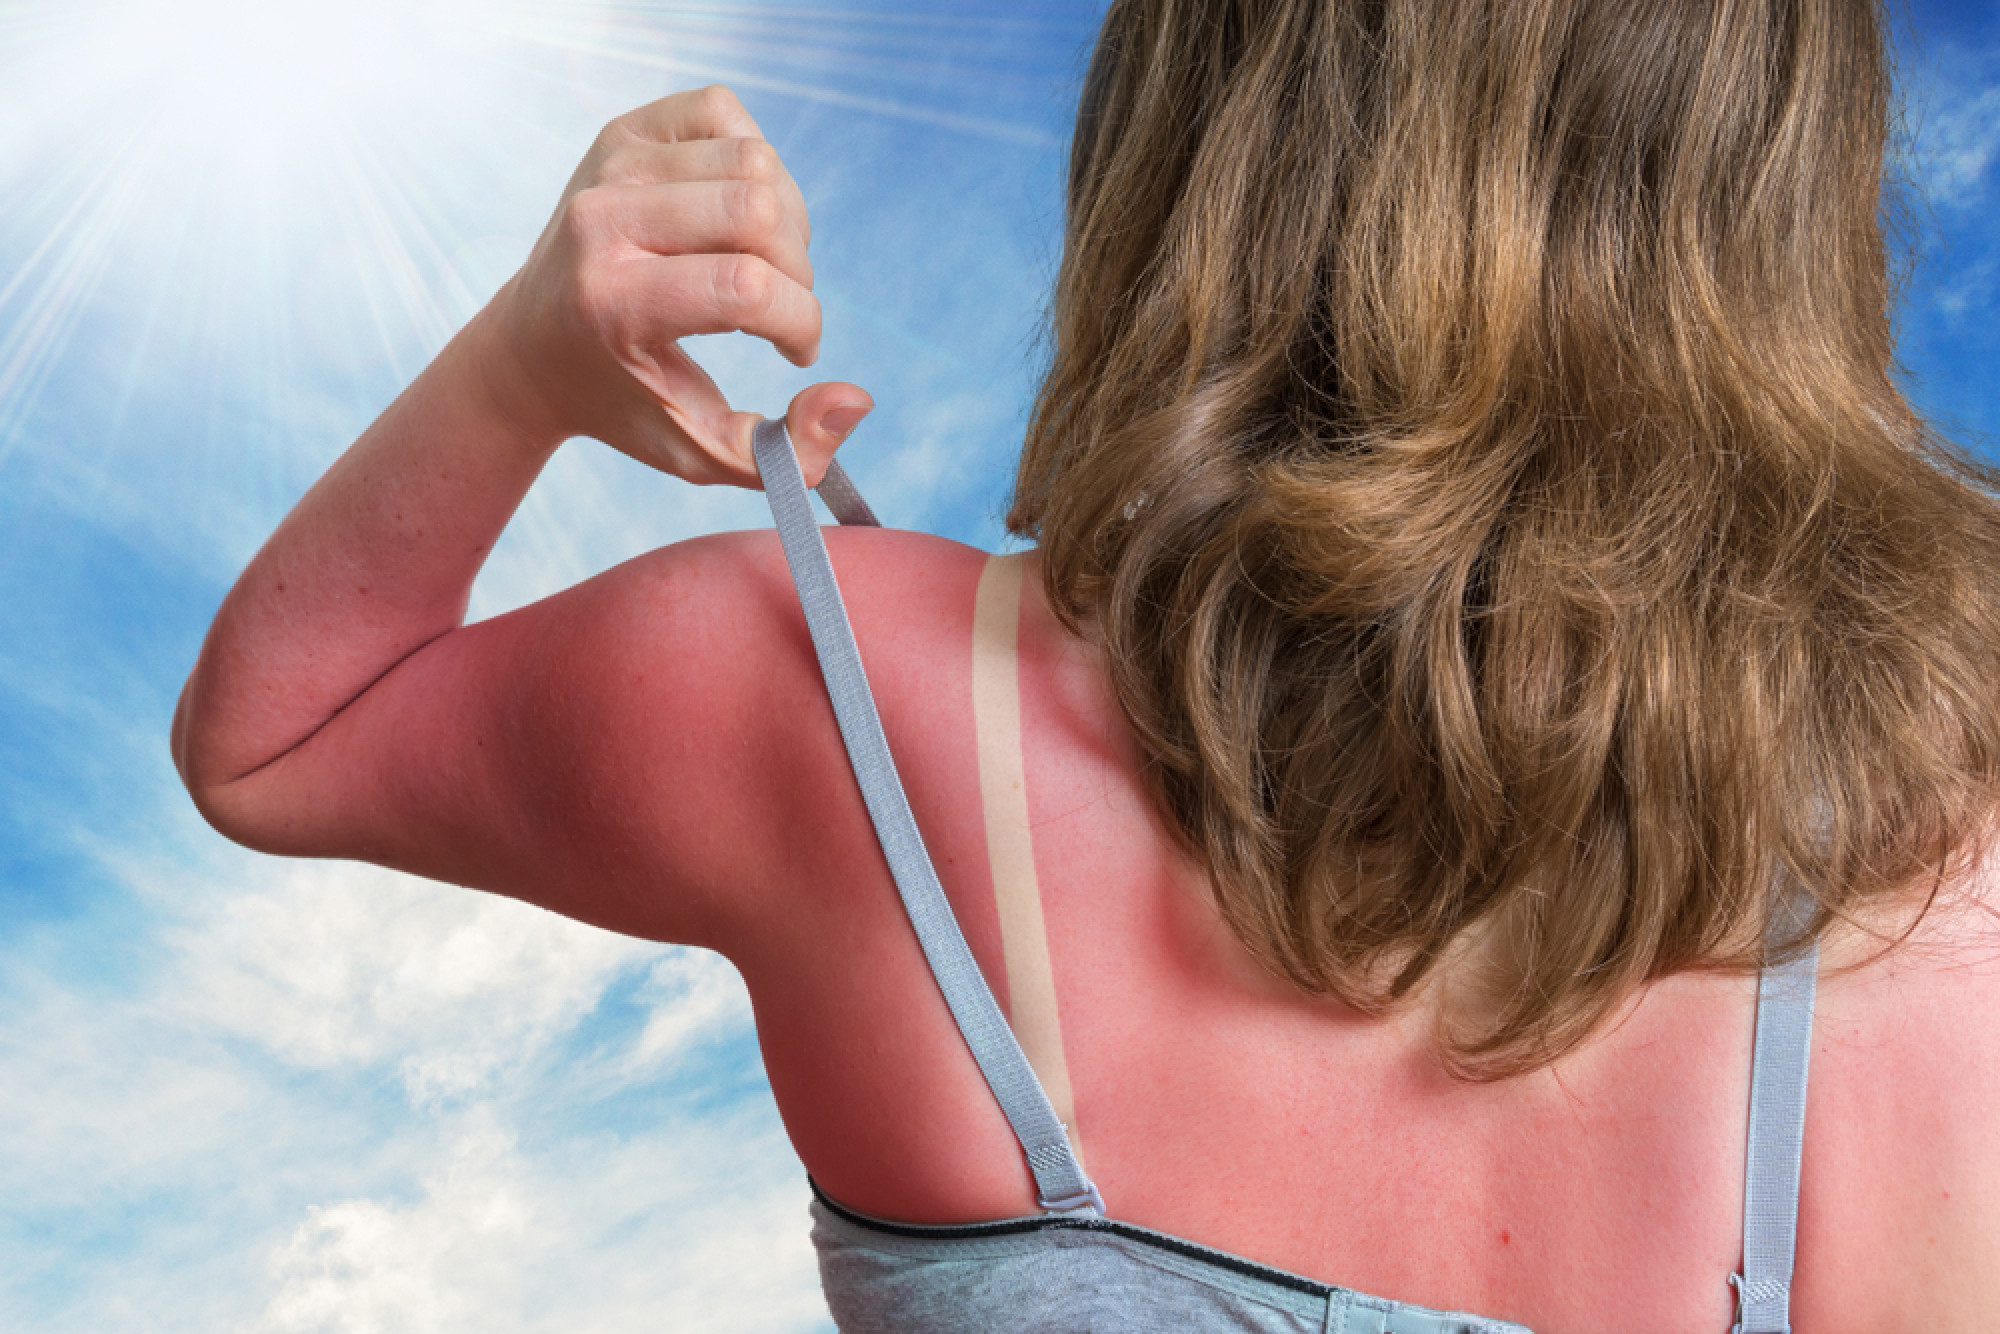 It is important to put sunscreen on all areas of exposed skin when outside in the sun to avoid getting sunburn. Photo: Shutterstock